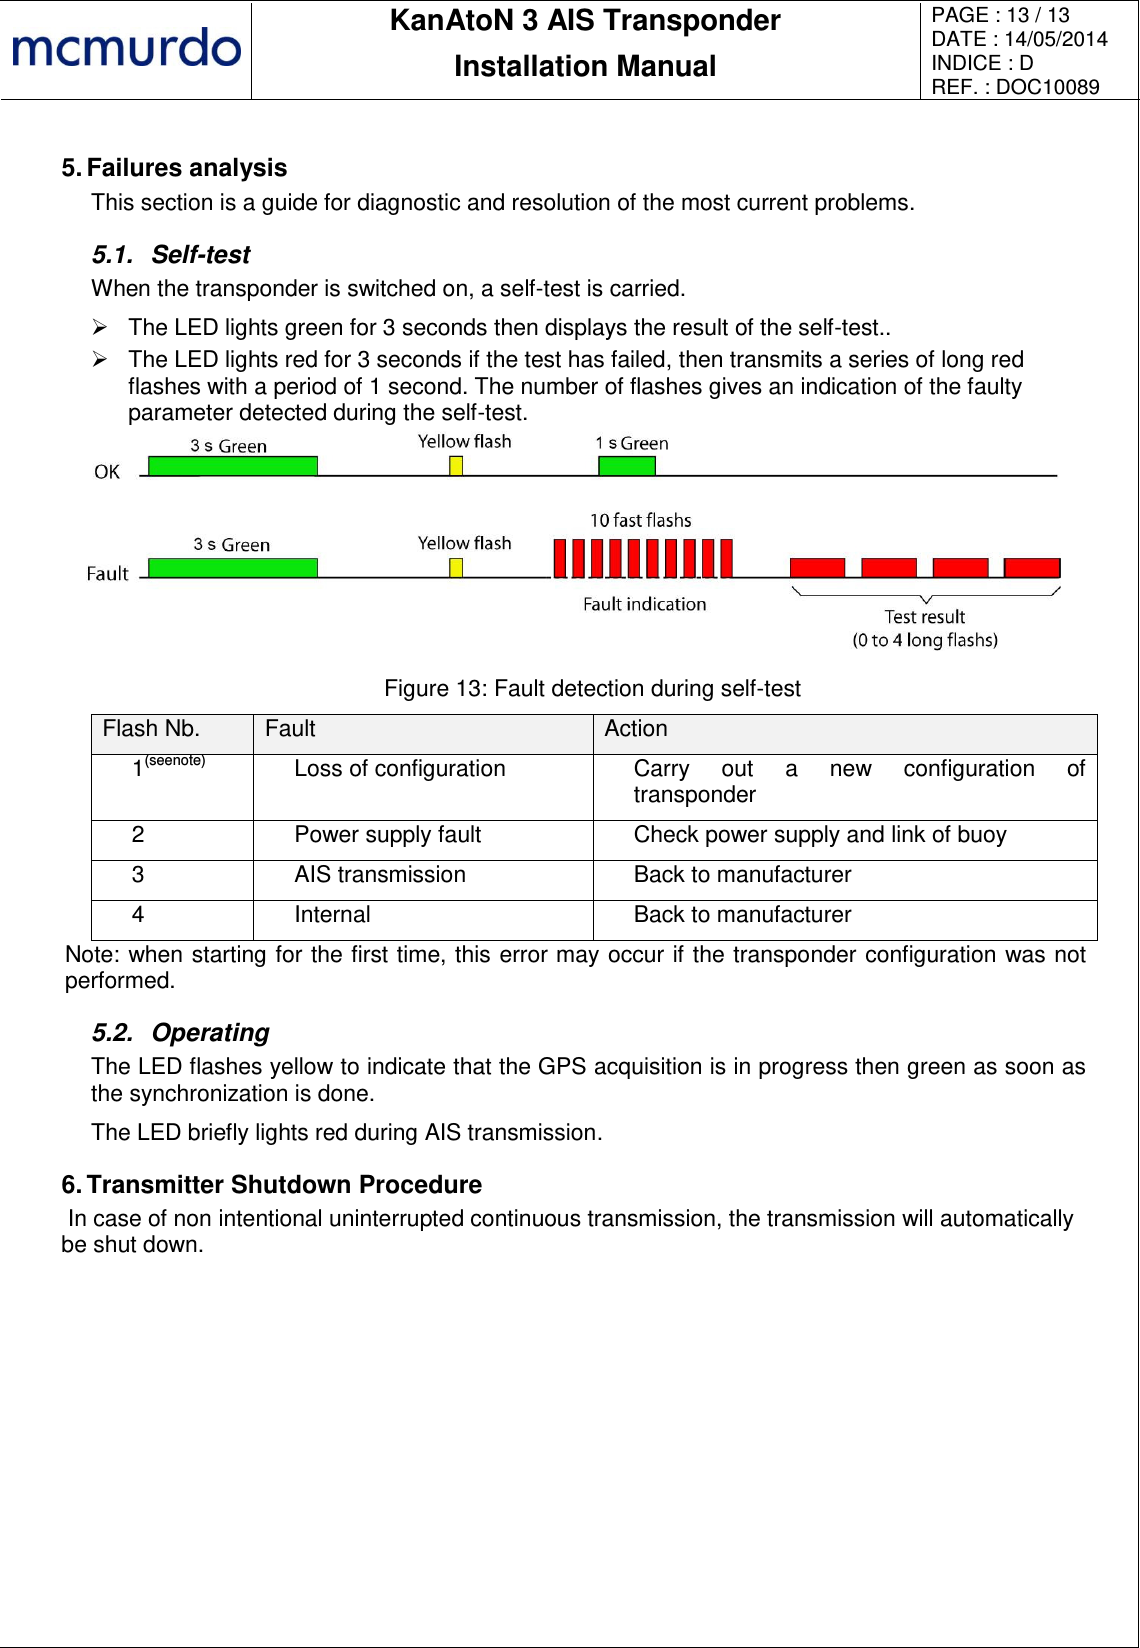       KanAtoN 3 AIS Transponder Installation Manual PAGE : 13 / 13 DATE : 14/05/2014 INDICE : D REF. : DOC10089   5. Failures analysis This section is a guide for diagnostic and resolution of the most current problems. 5.1.  Self-test When the transponder is switched on, a self-test is carried.   The LED lights green for 3 seconds then displays the result of the self-test..   The LED lights red for 3 seconds if the test has failed, then transmits a series of long red flashes with a period of 1 second. The number of flashes gives an indication of the faulty parameter detected during the self-test.  Figure 13: Fault detection during self-test Flash Nb. Fault Action 1(seenote) Loss of configuration Carry  out  a  new  configuration  of transponder 2 Power supply fault Check power supply and link of buoy 3 AIS transmission Back to manufacturer 4 Internal Back to manufacturer Note: when starting for the first time, this error may occur if the transponder configuration was not performed. 5.2.  Operating The LED flashes yellow to indicate that the GPS acquisition is in progress then green as soon as the synchronization is done. The LED briefly lights red during AIS transmission. 6. Transmitter Shutdown Procedure  In case of non intentional uninterrupted continuous transmission, the transmission will automatically be shut down.